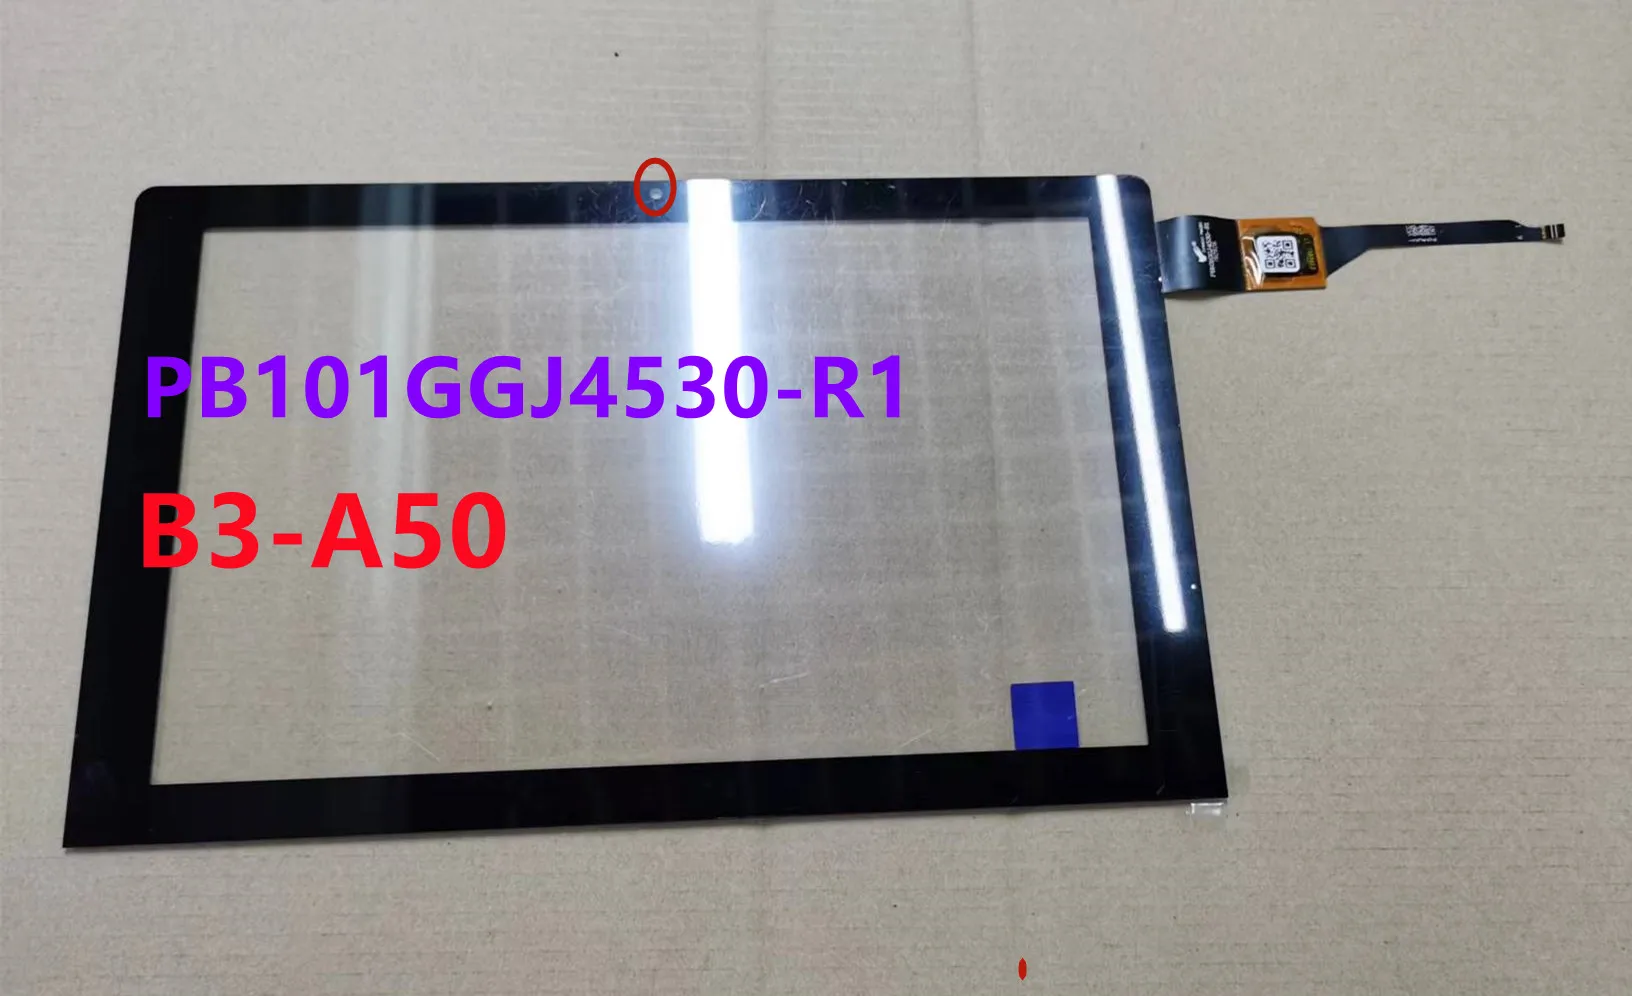 

New 10.1 Inch PB101GGJ4530-R1 Panel Touch Screen Digitizer For Acer Iconia One 10 B3 A50 B3-A50 PB101GGJ4530 100% Tested